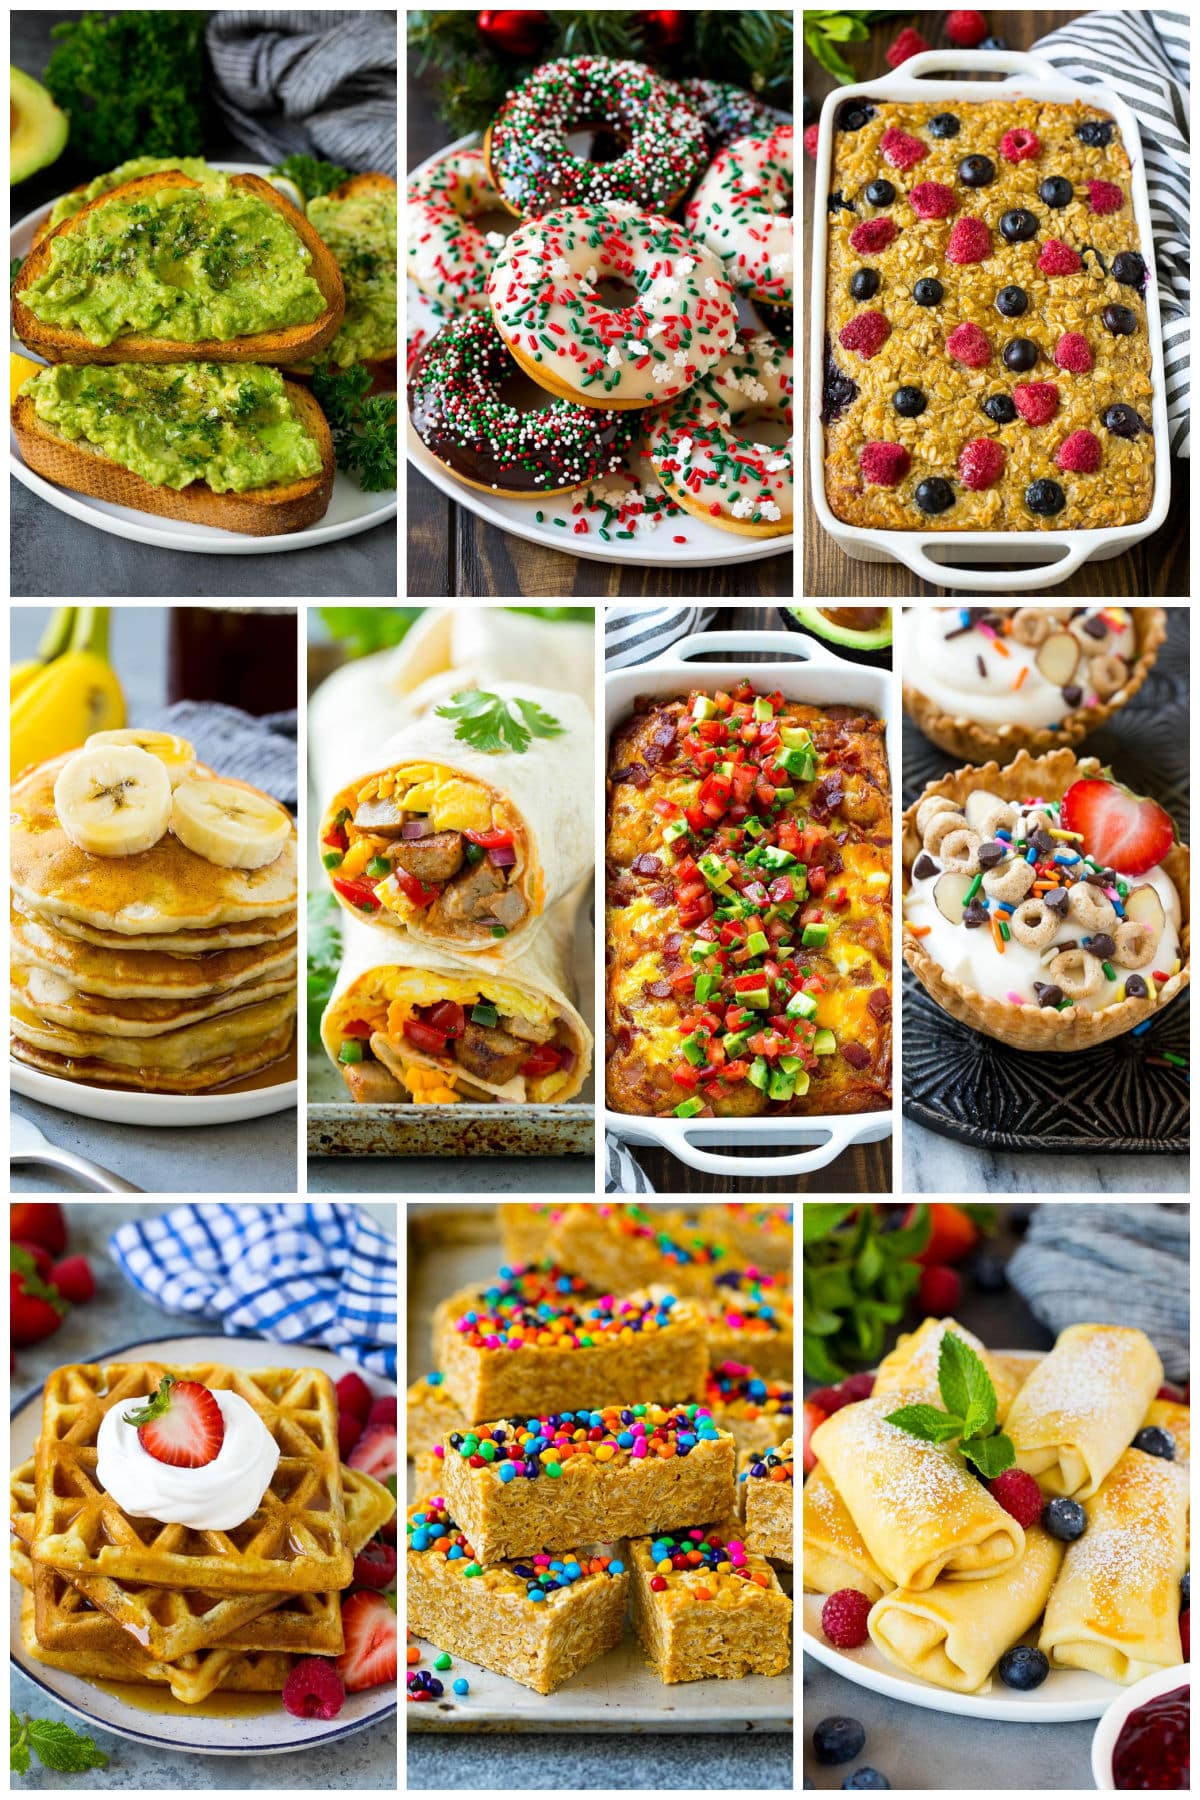 A group of pictures of kids breakfast ideas like breakfast burritos, banana pancakes and buttermilk waffles.